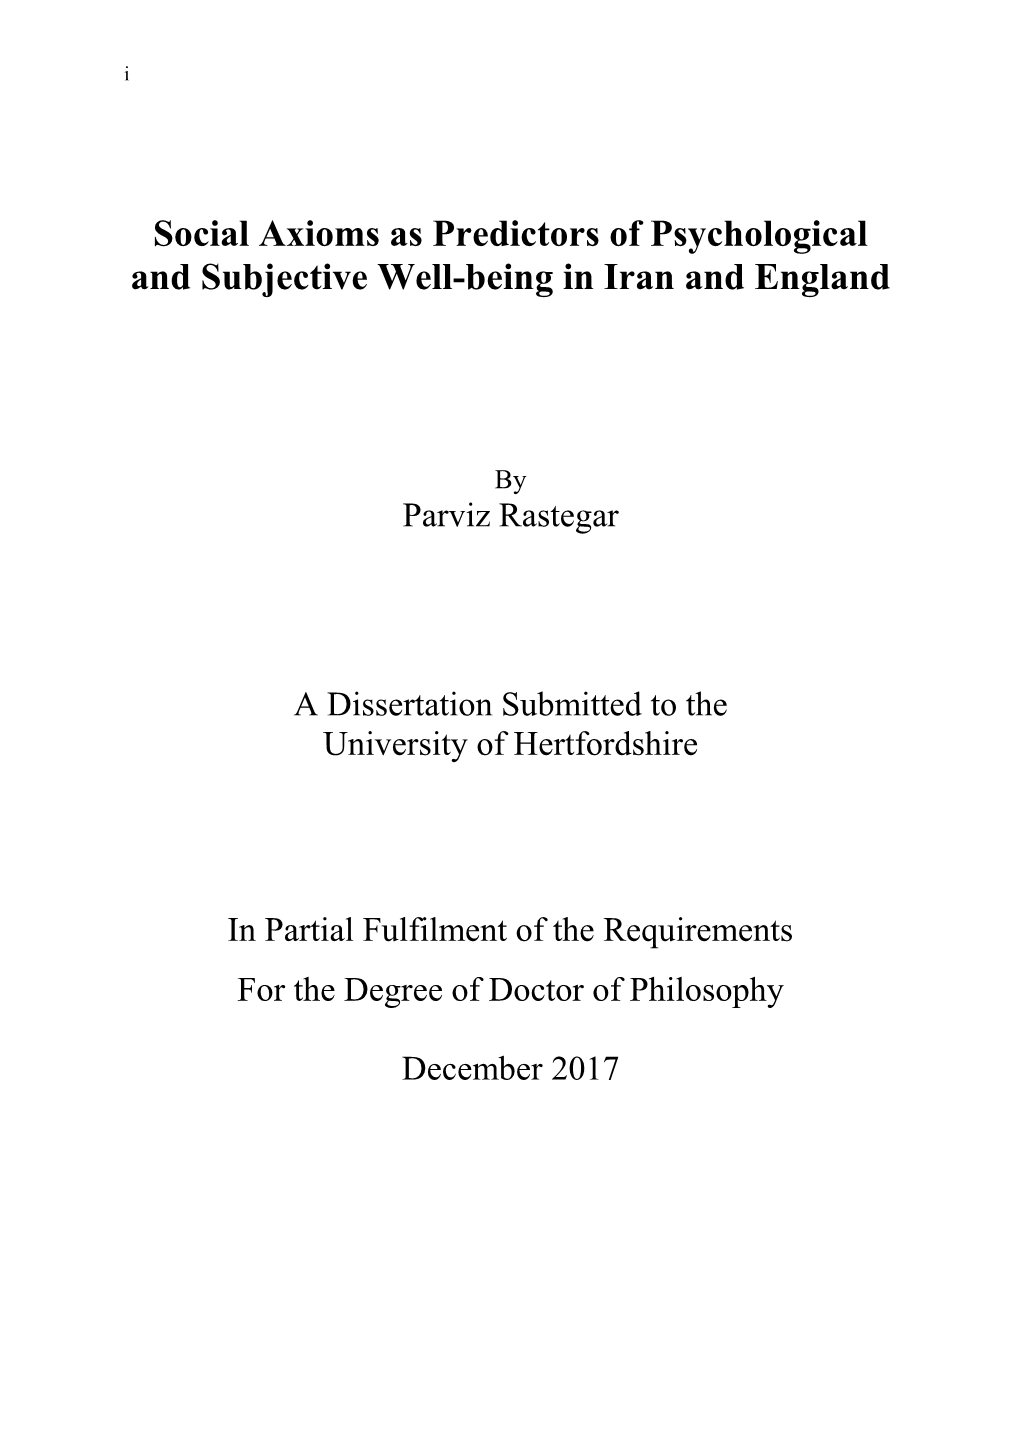 Social Axioms As Predictors of Psychological and Subjective Well-Being in Iran and England